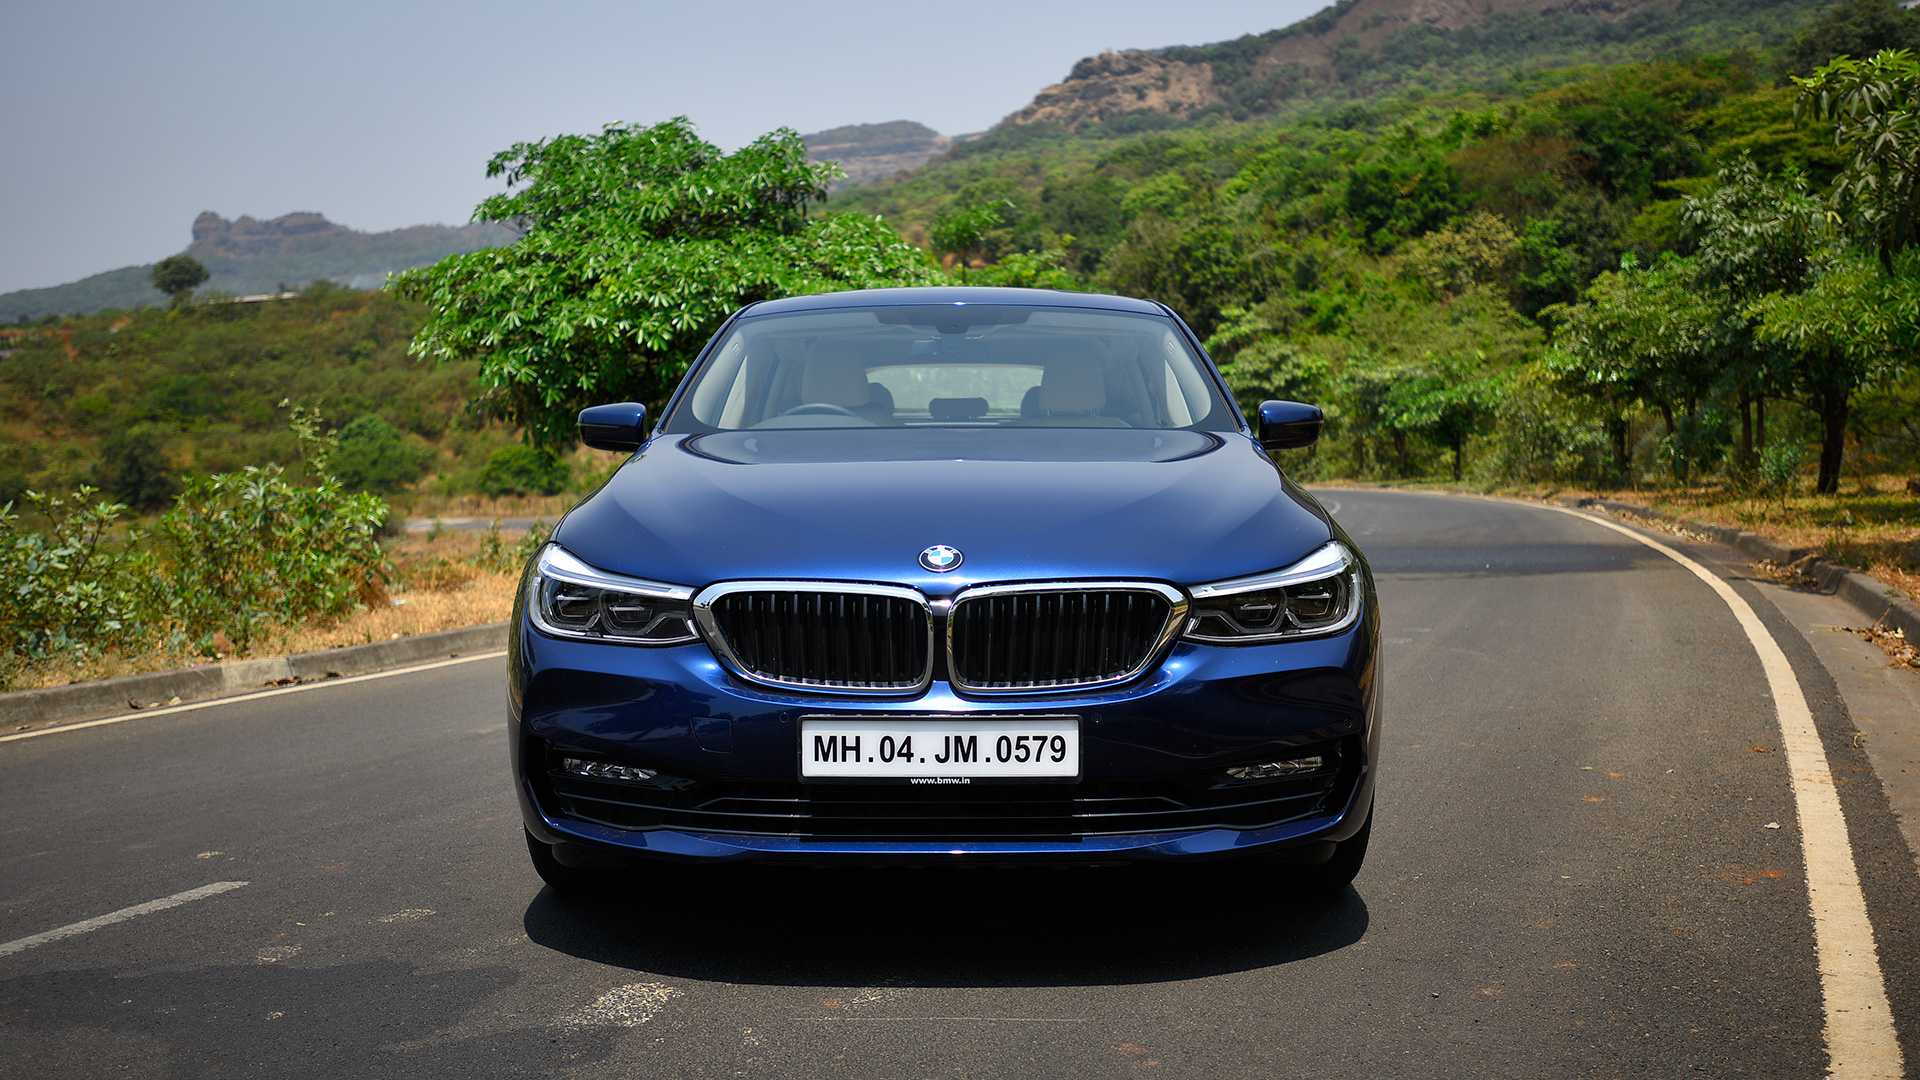 BMW 6 Series 2019 630i GT - Price, Mileage, Reviews, Specification, Gallery  - Overdrive